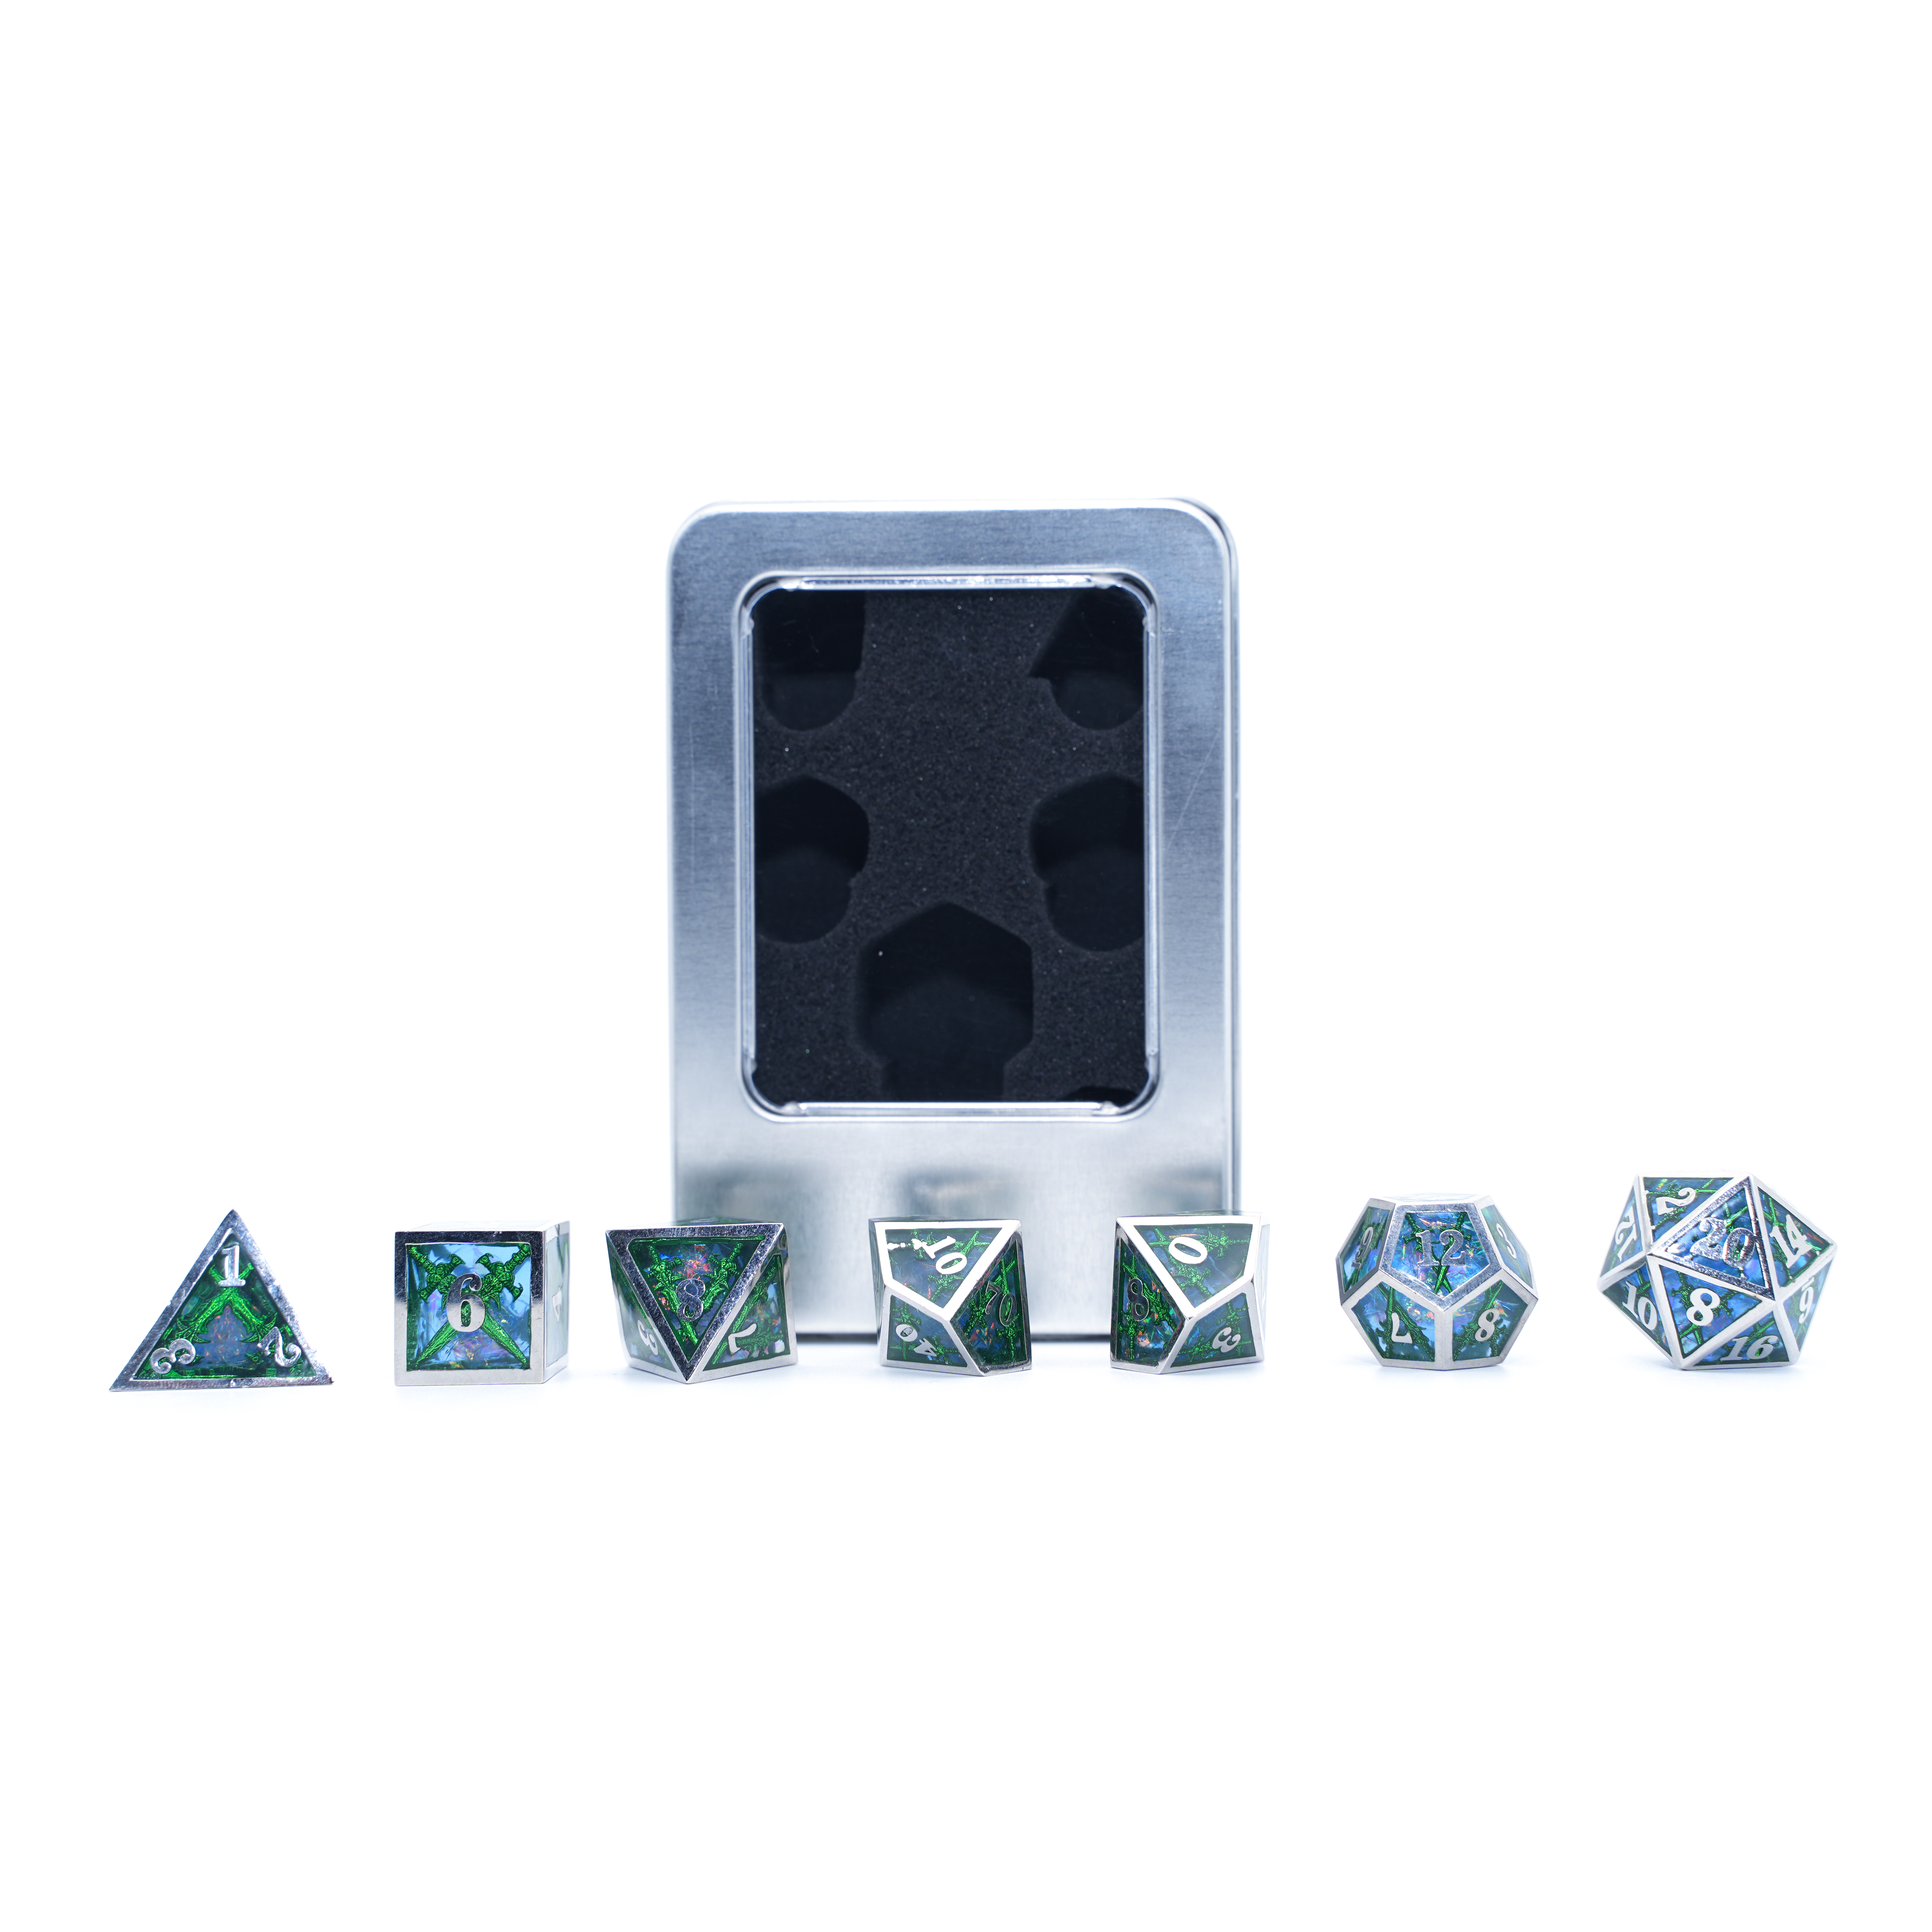 Summer of Colour: Metal Dice brings variety to tabletop gaming - Gayming Magazine